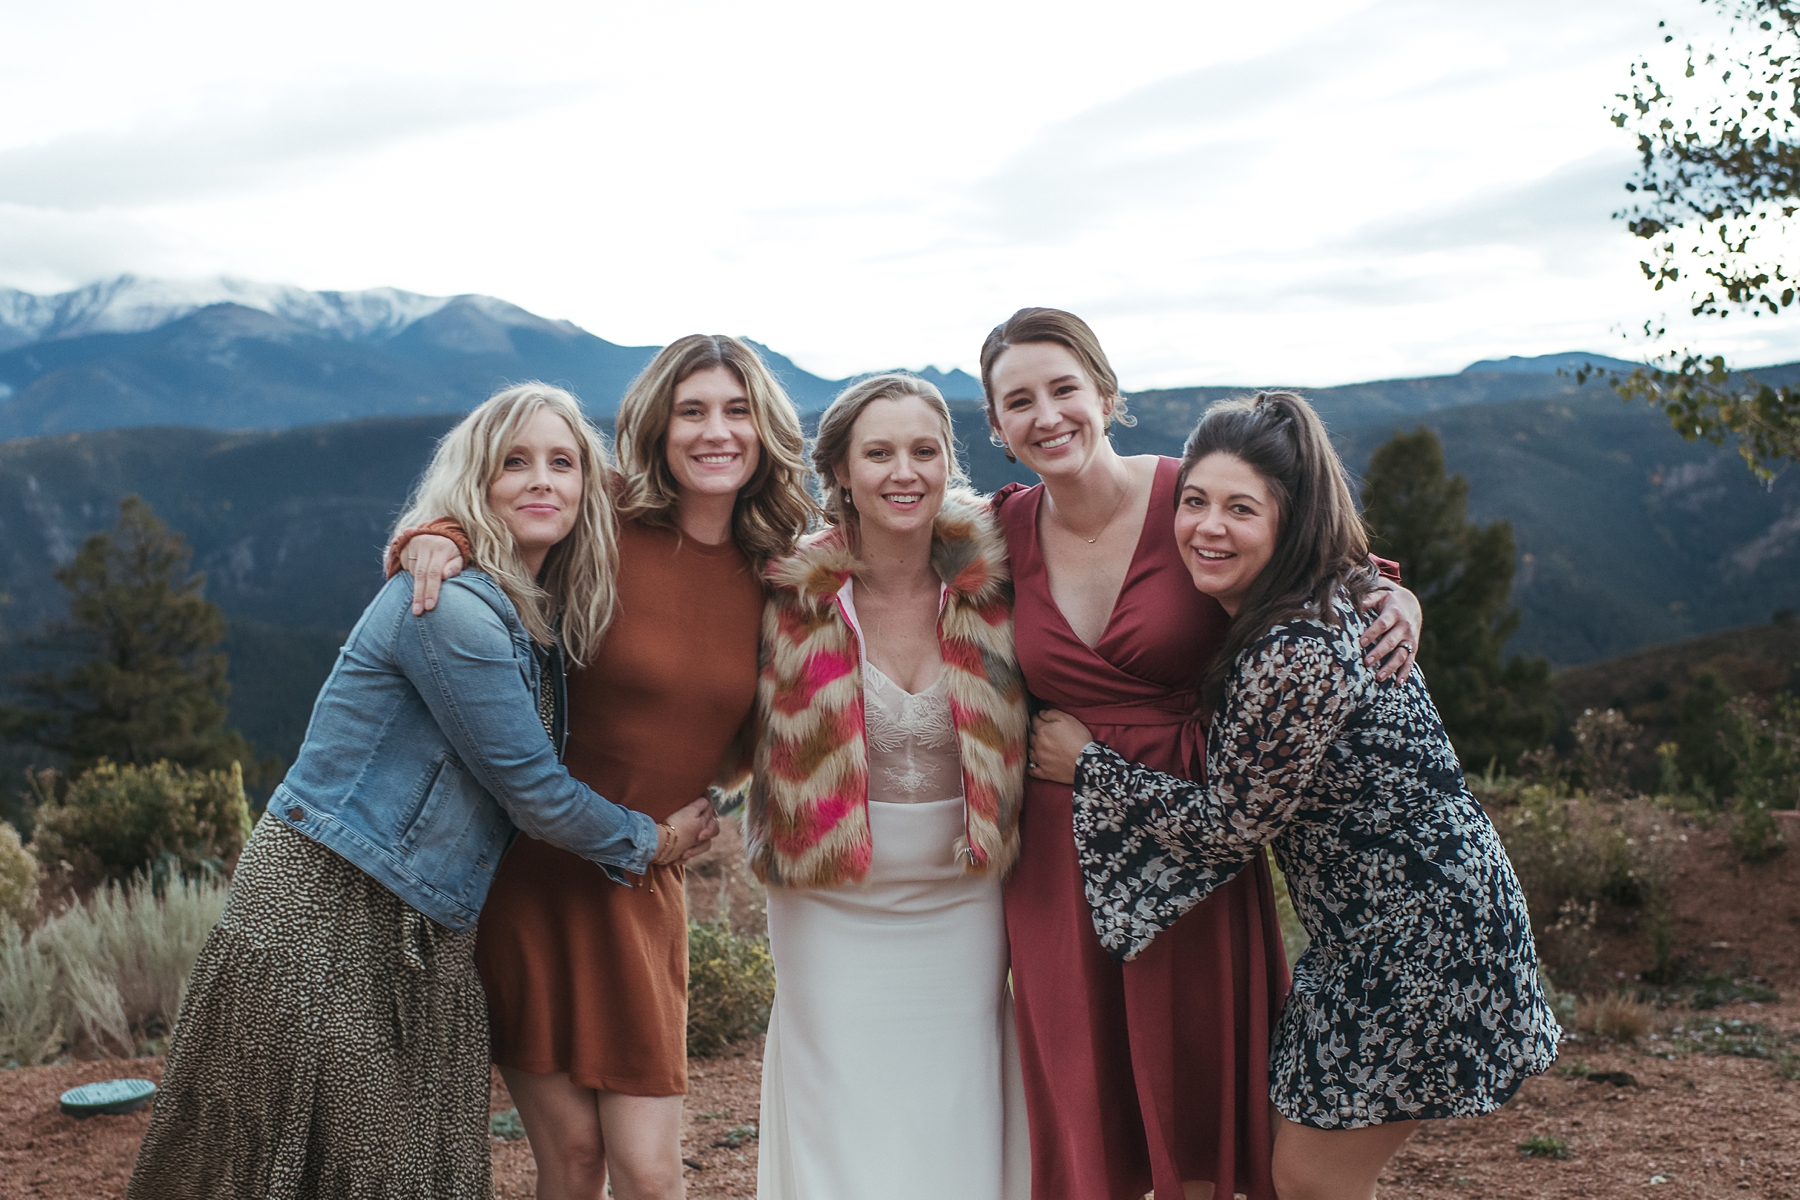 Bride with friends in front of mountains at Airbnb wedding venue in Colorado